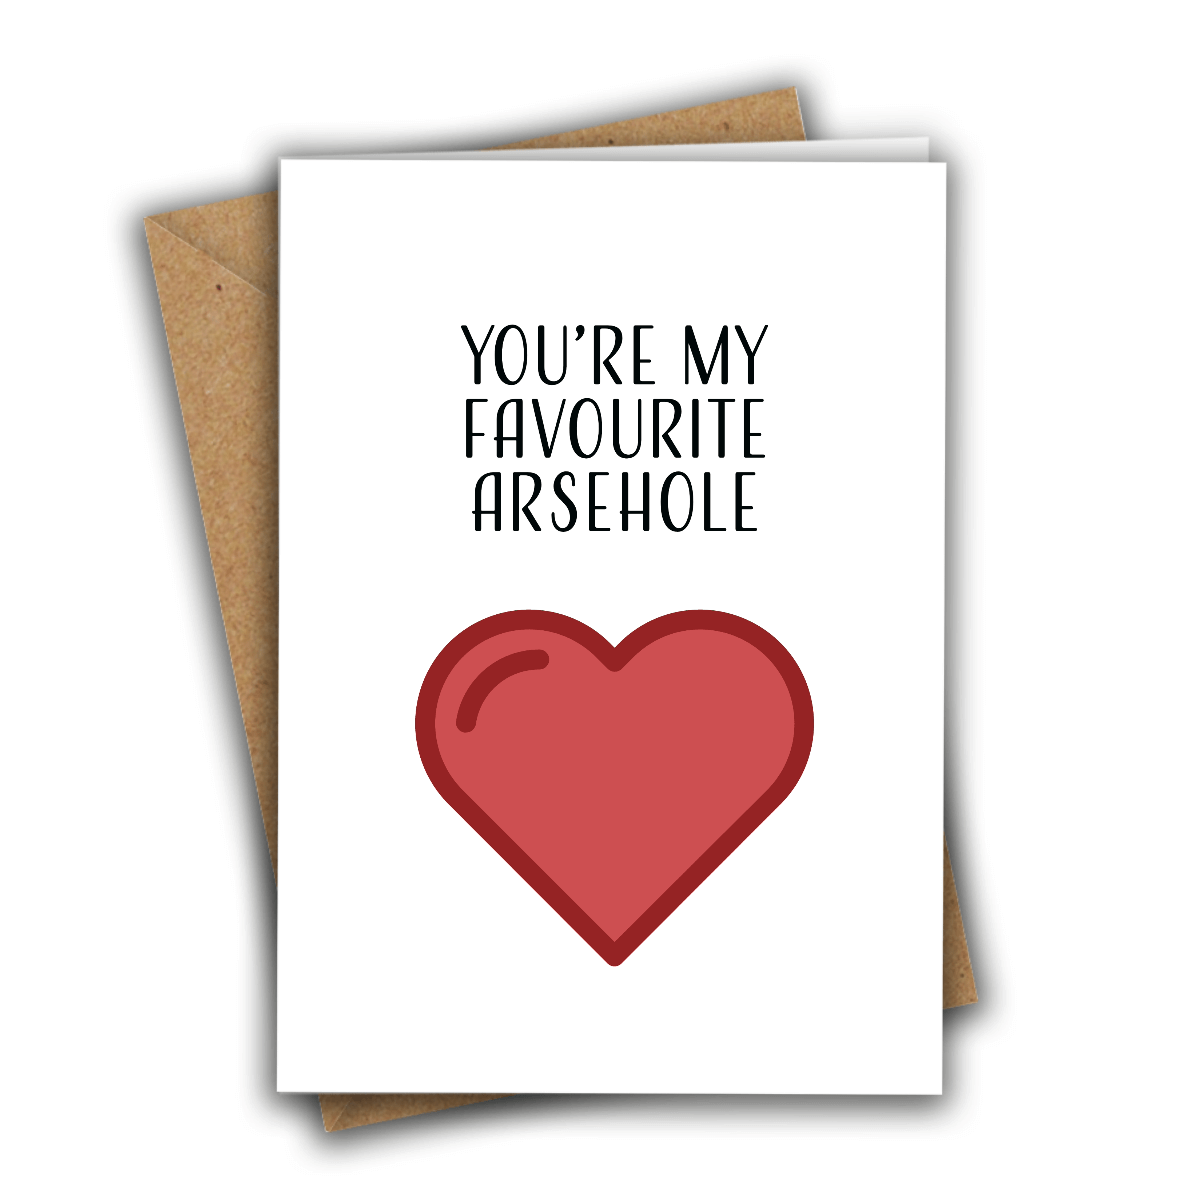 Little Kraken's You're My Favourite Arsehole Funny Love Anniversary Valentine's Greeting Card, for £3.50 each